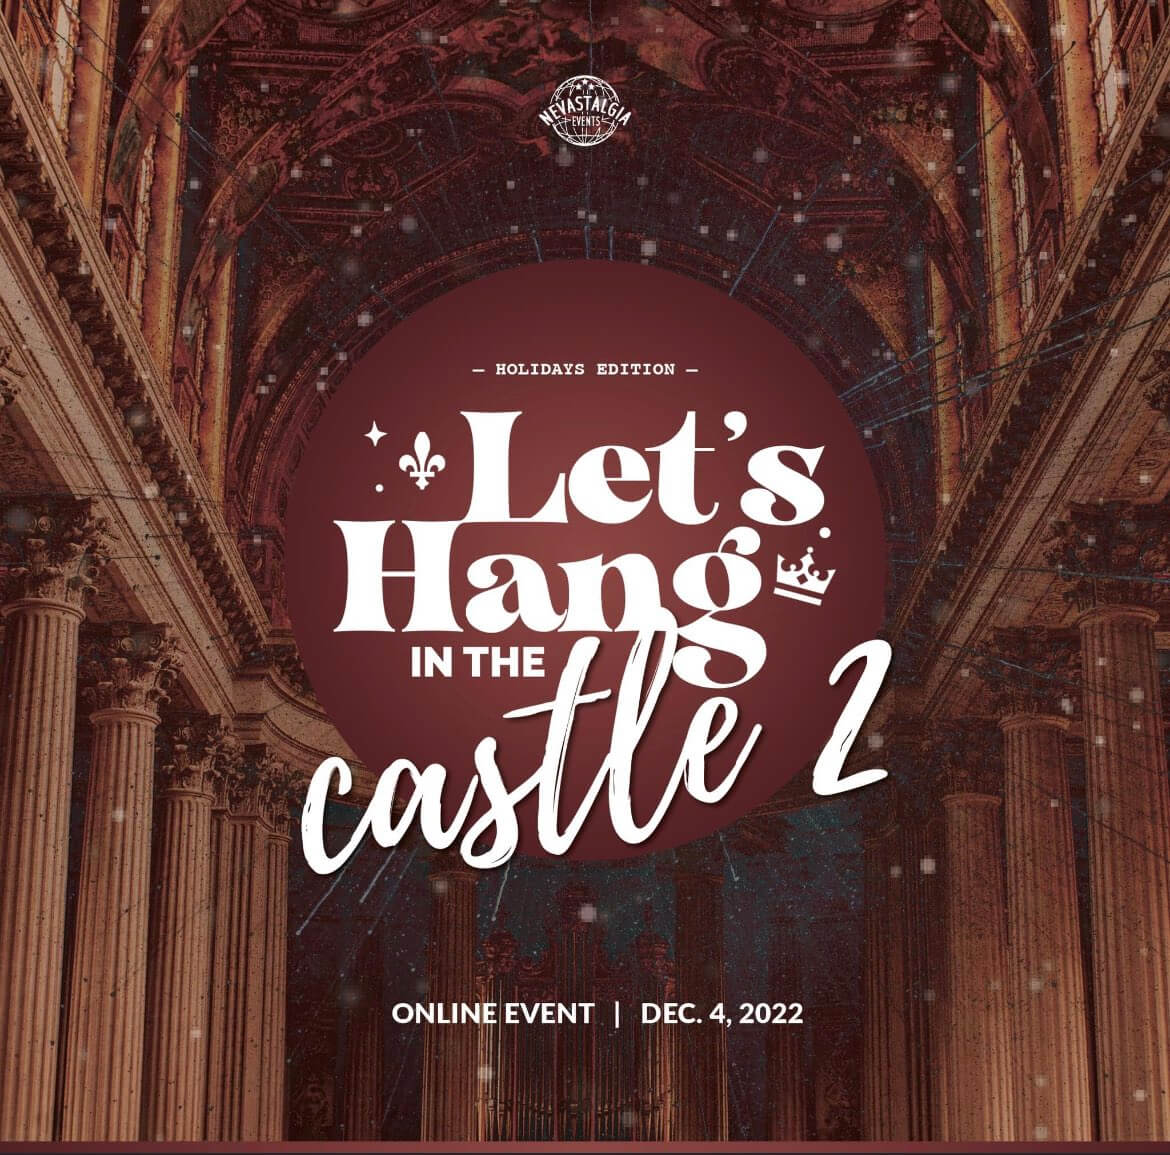 Let's Hang in the Castle 2